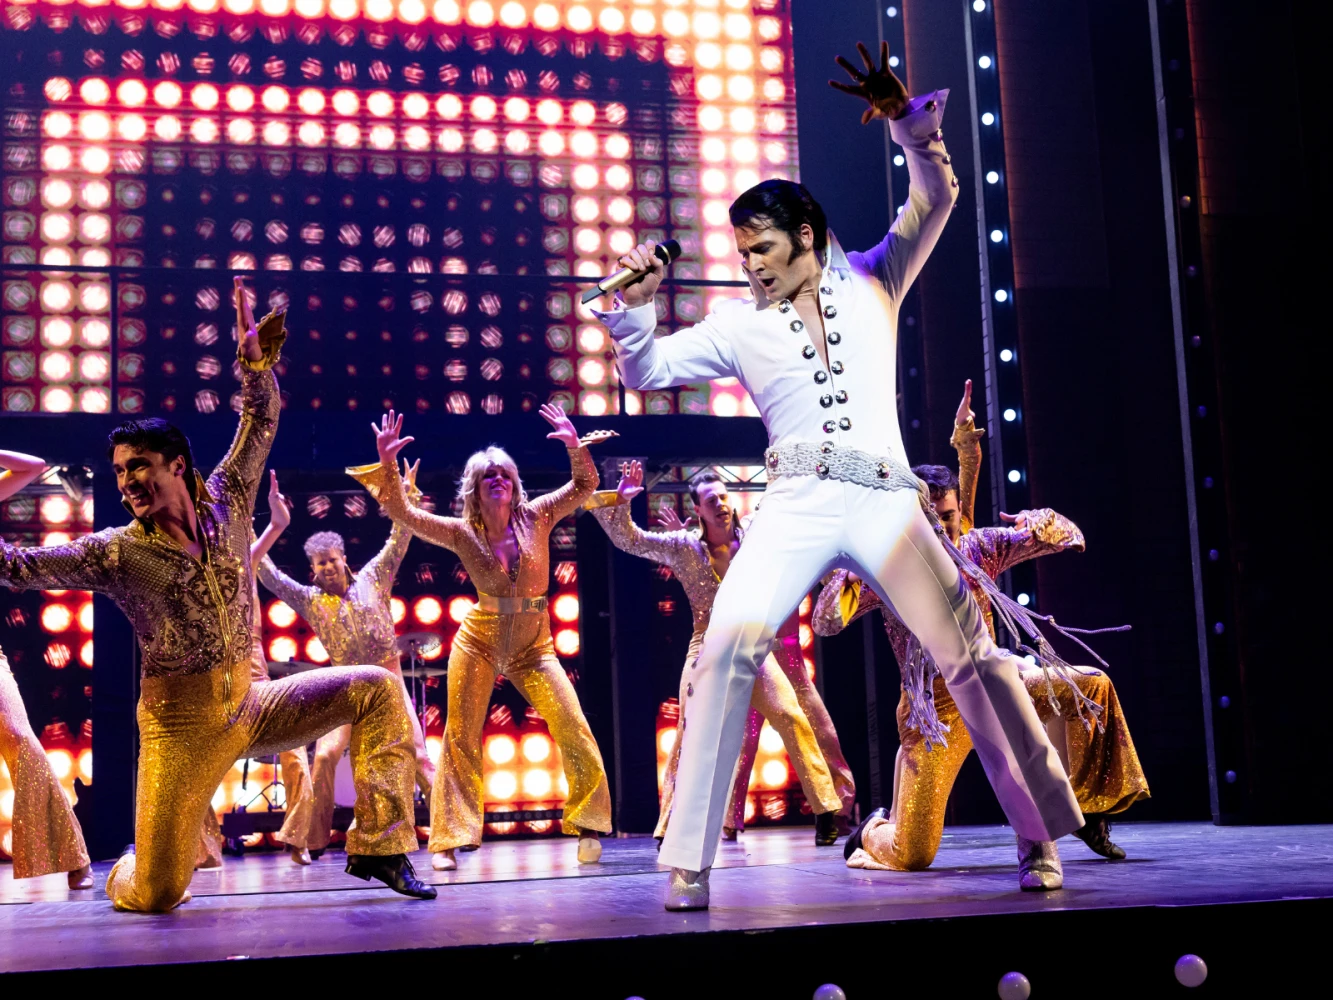 Elvis: A Musical Revolution: What to expect - 2